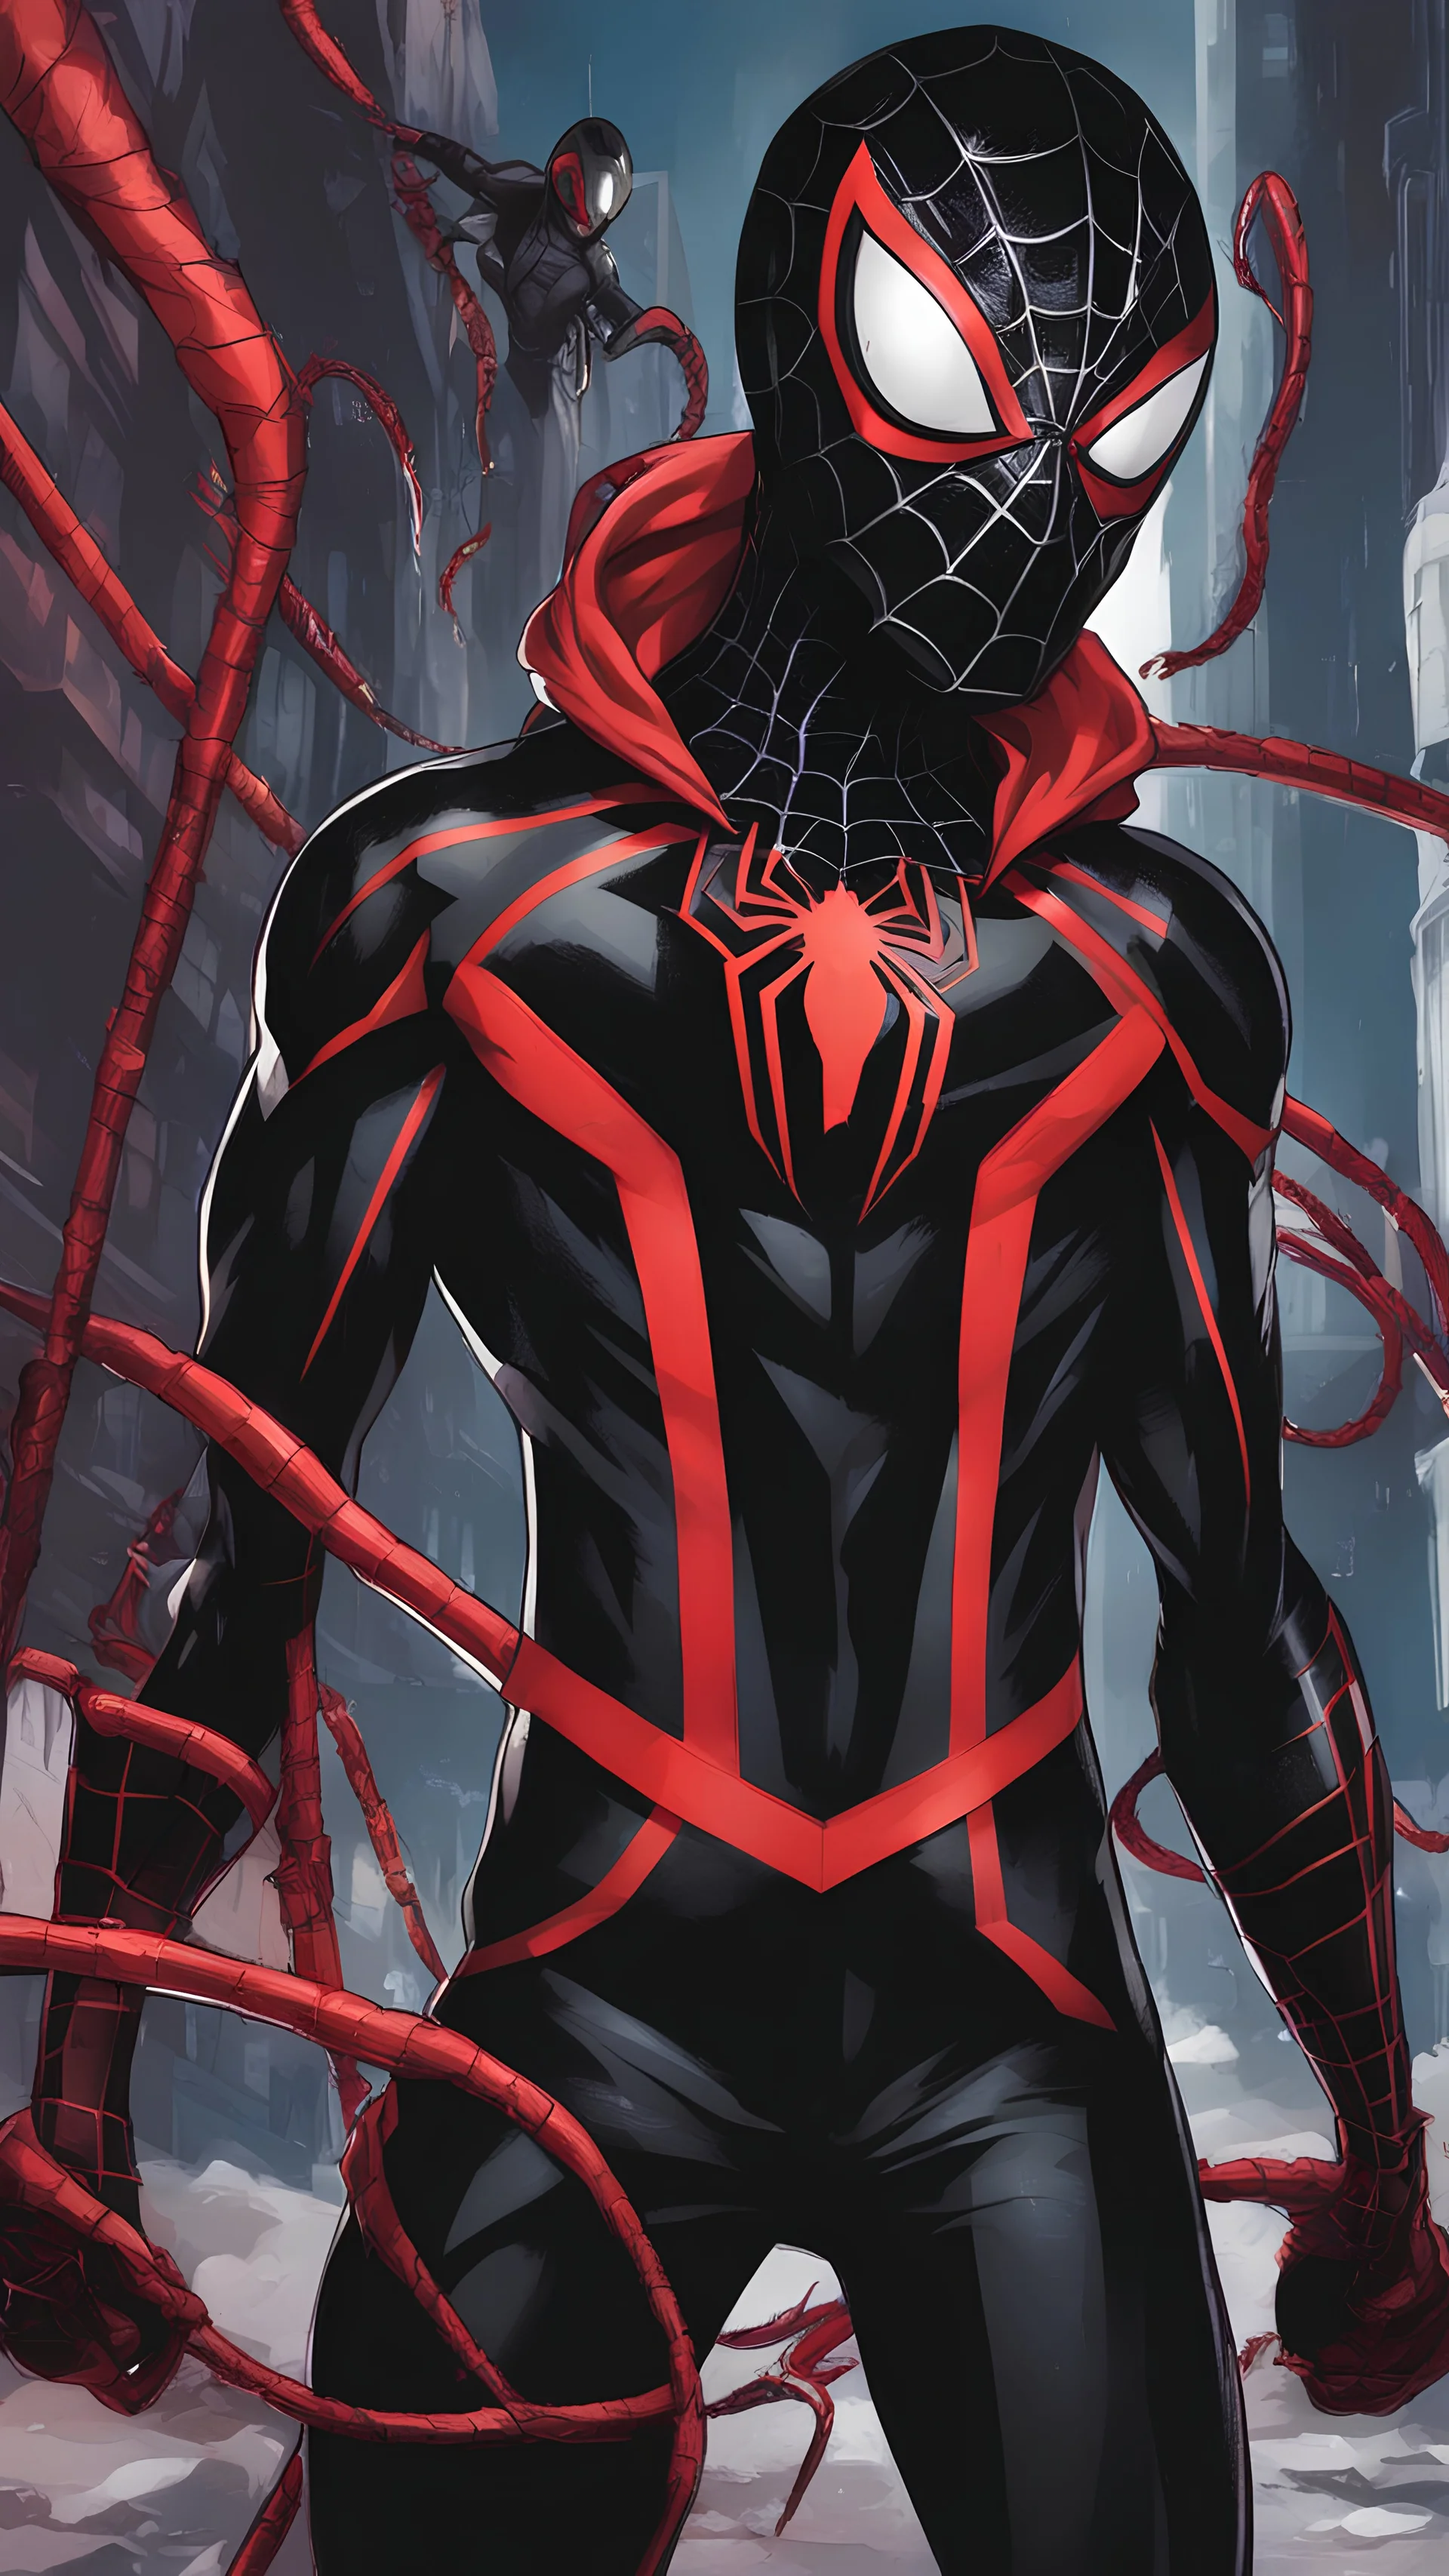 miles morales mix with venom symbiote in color Street artstyle, Street boy them, intricate details, highly detailed, high details